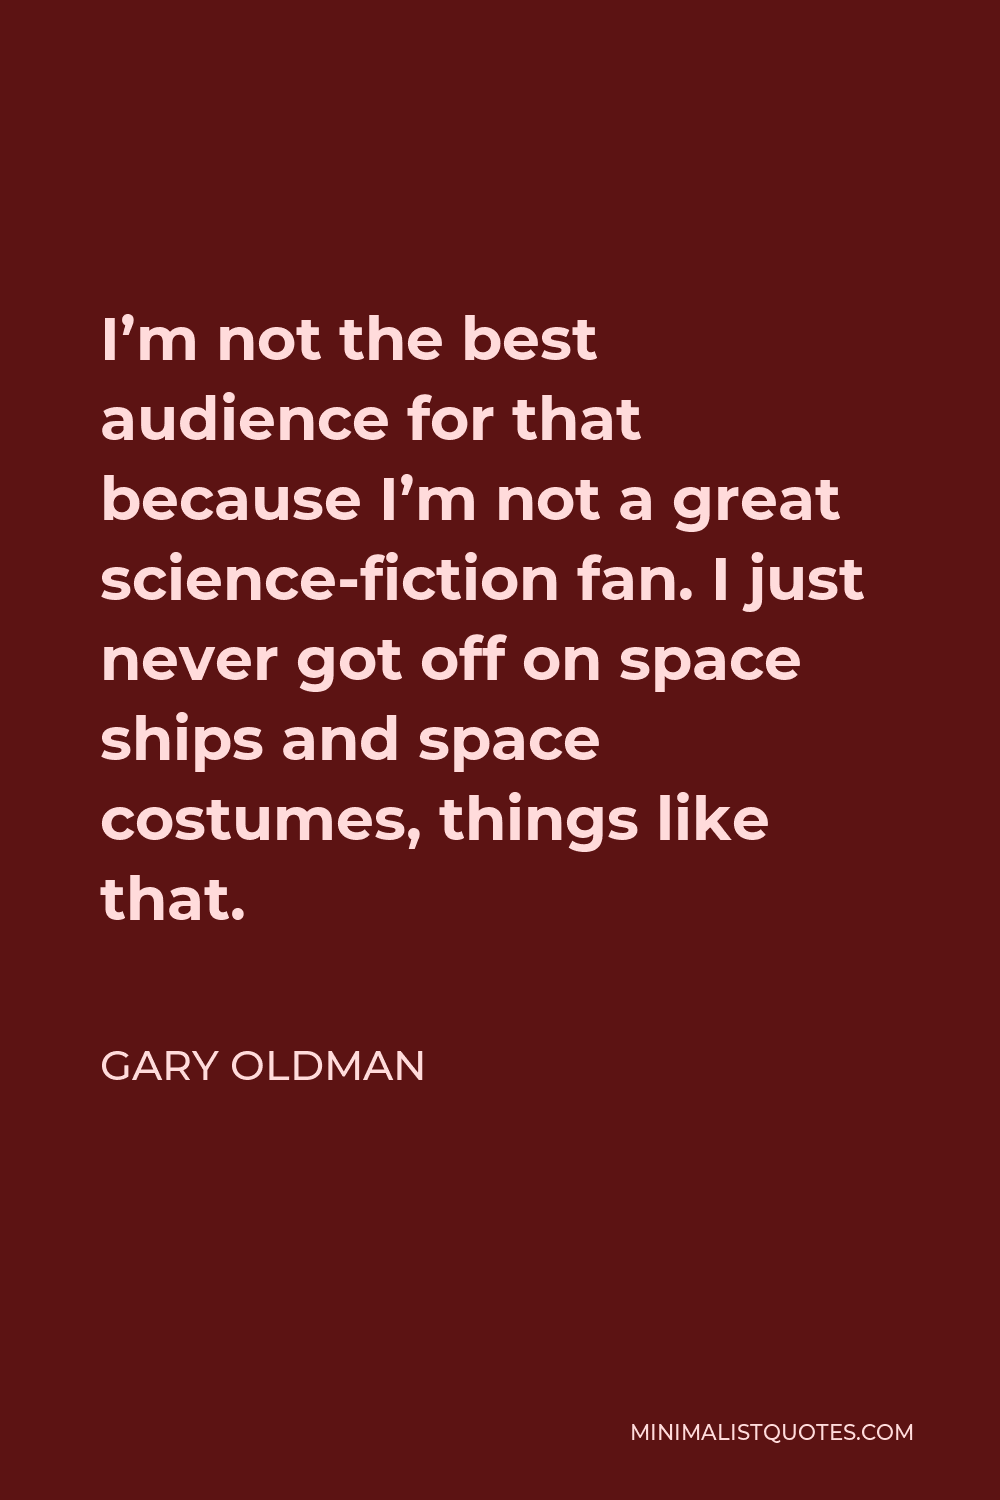 Gary Oldman Quote - I’m not the best audience for that because I’m not a great science-fiction fan. I just never got off on space ships and space costumes, things like that.